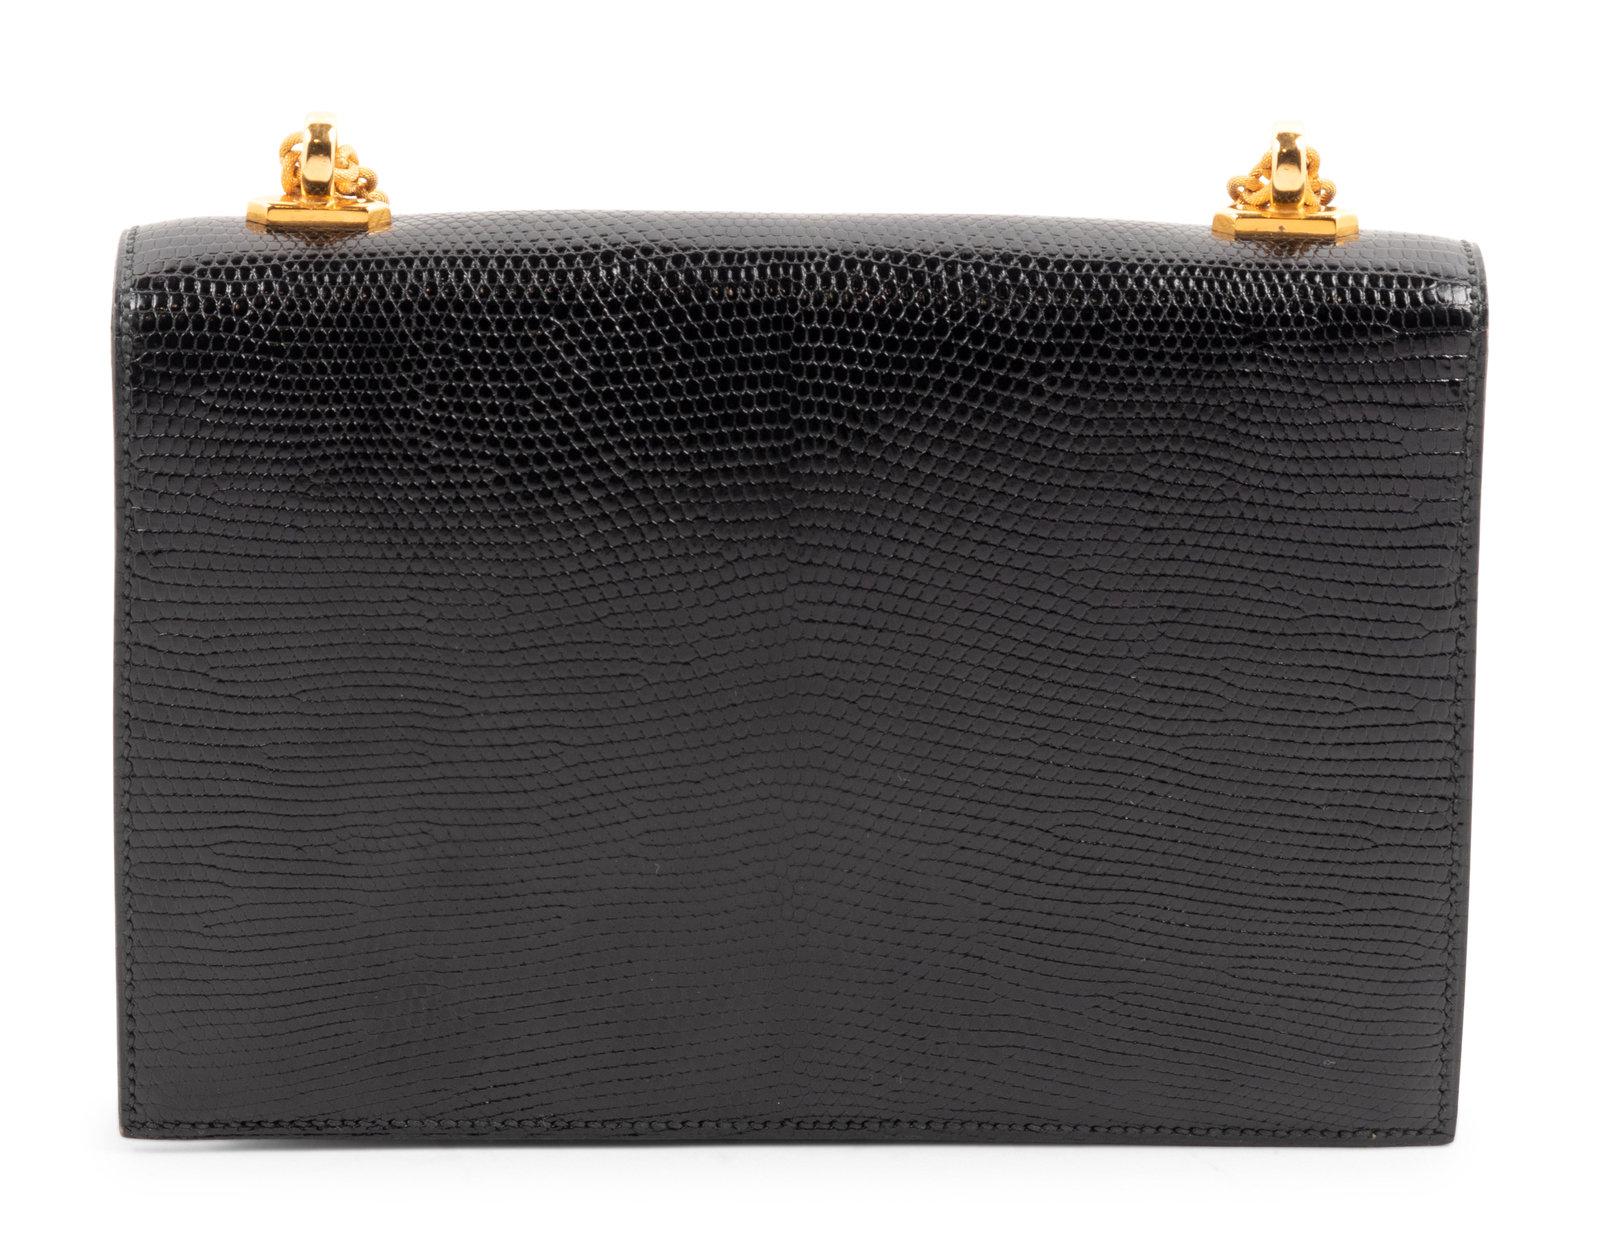 Hermès Black Lizard Alcazar Top Handle Shoulder Bag, 1980. This collectors piece is truly an exceptional representation of the Hermès craftsmanship and attention to detail. The structure of the Alcazar is bold and elegant, perfect for formal